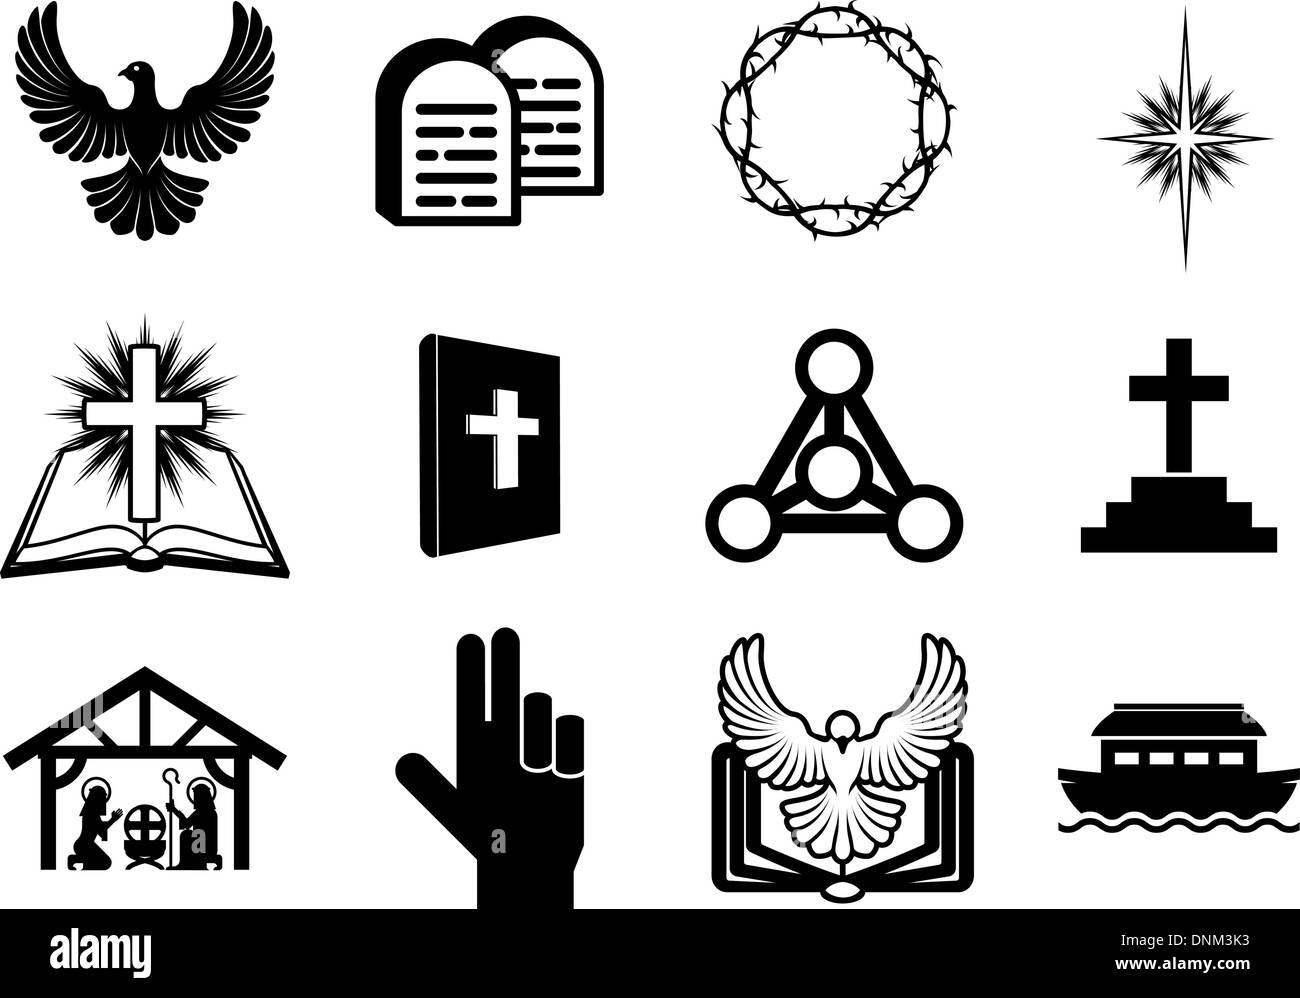 Set of Christian religious icons, signs and symbols Stock Vector